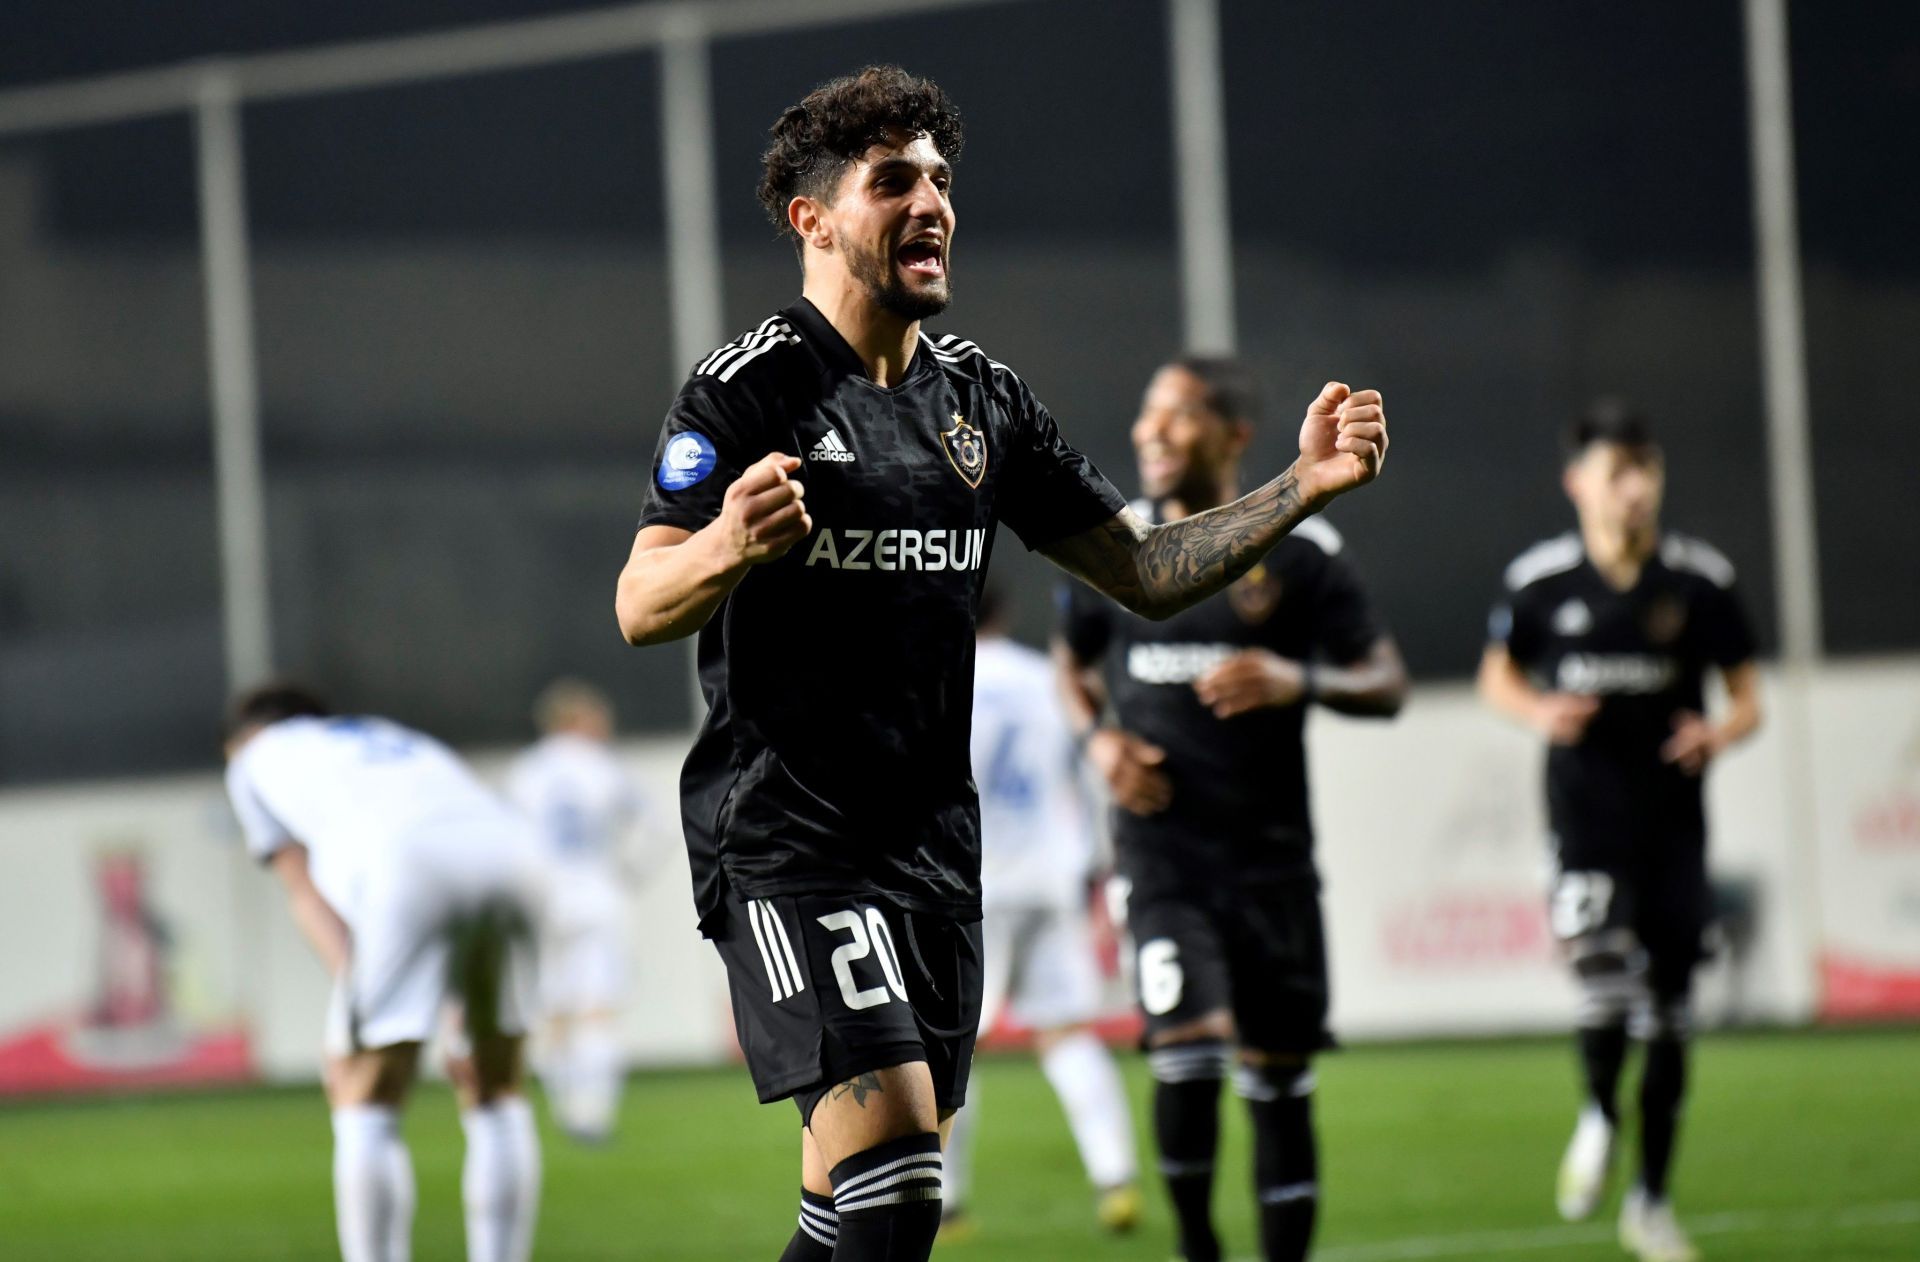 Qarabag will meet Lincoln Red Imps in the UEFA Champions League qualifier on Wednesday